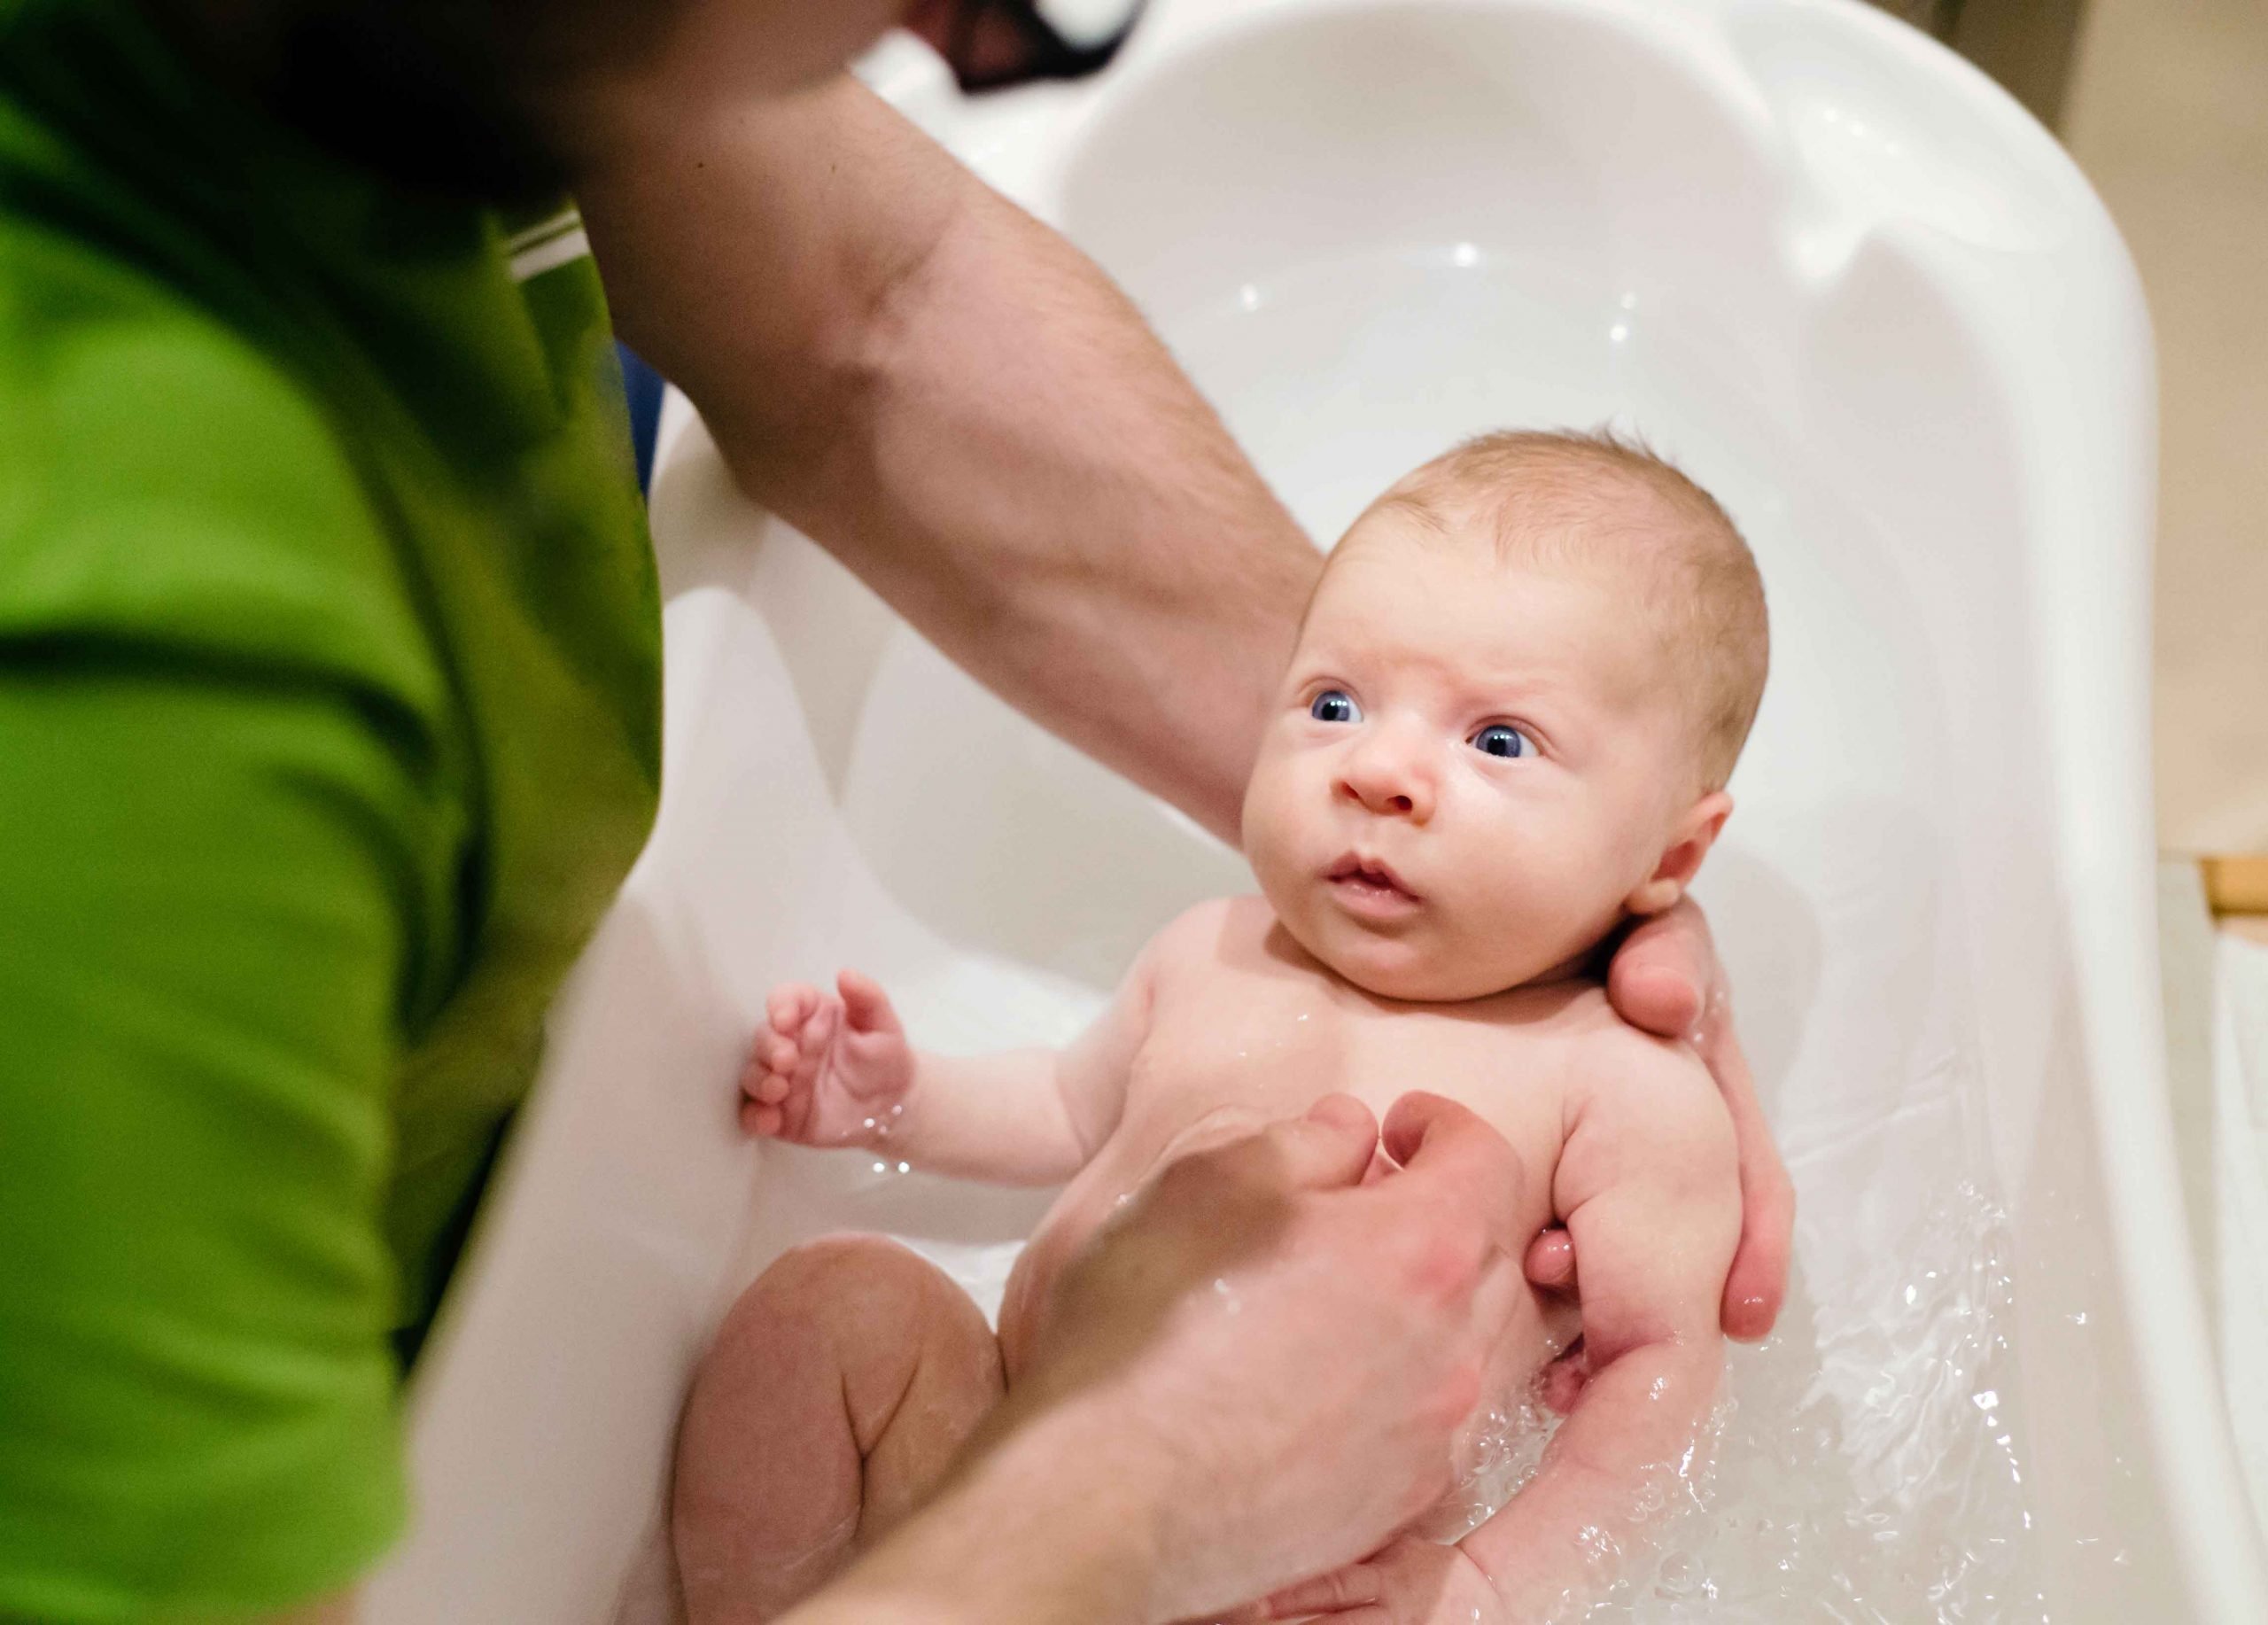 Bathing baby: How often to bathe newborn and how?